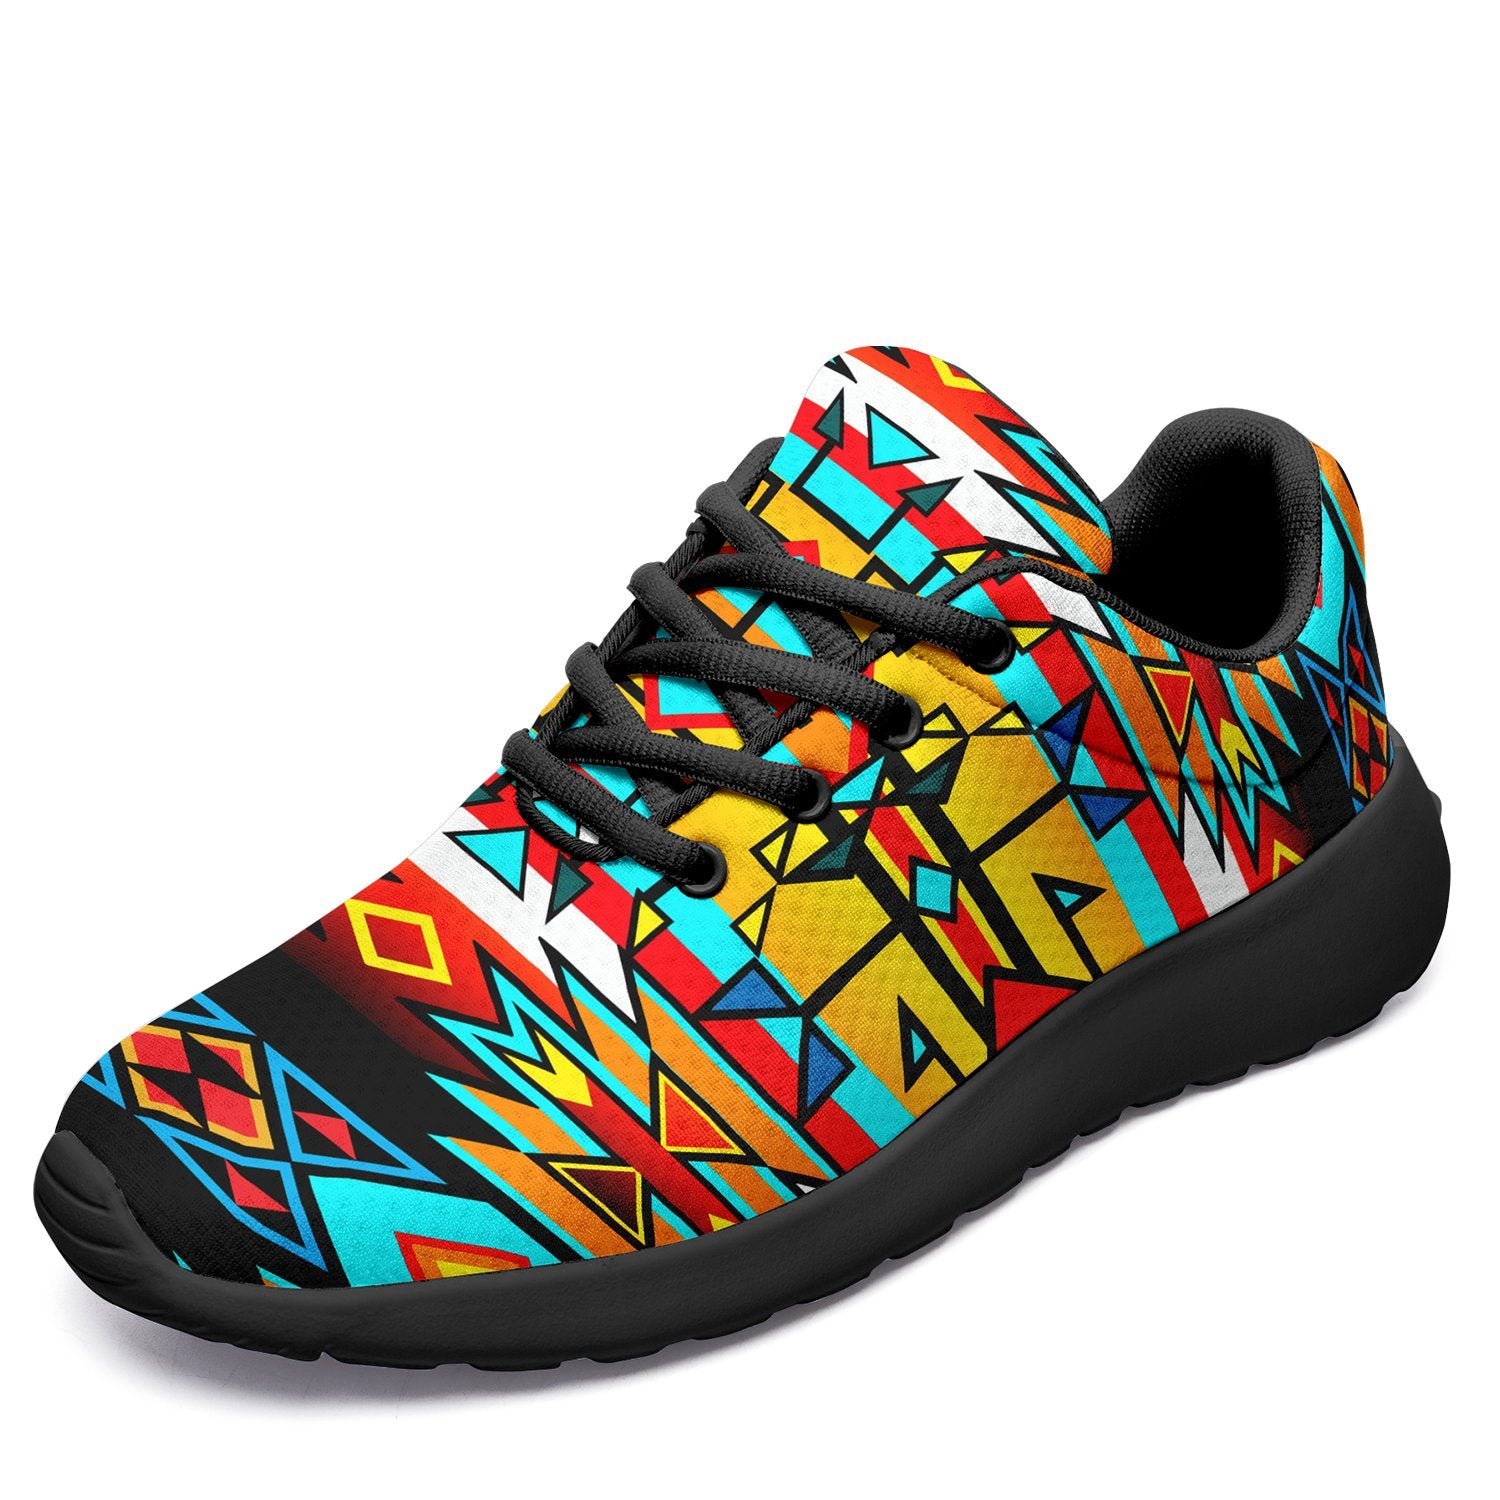 Force of Nature Twister Ikkaayi Sport Sneakers 49 Dzine US Women 4.5 / US Youth 3.5 / EUR 35 Black Sole 